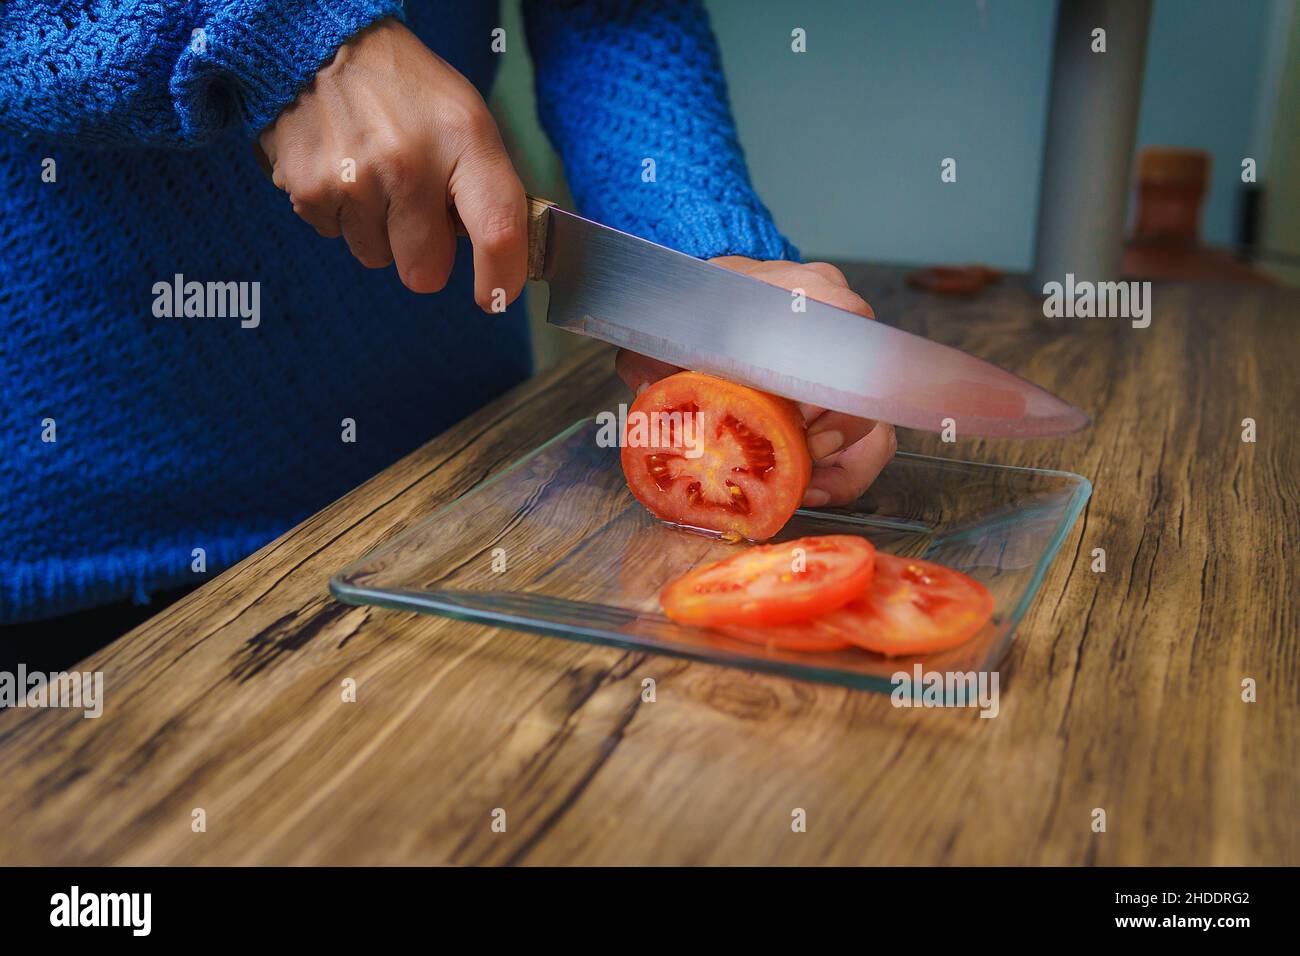 On the table there is a cutting board and you can see a woman's hands cutting white onions with a chef's knife. Stock Photo